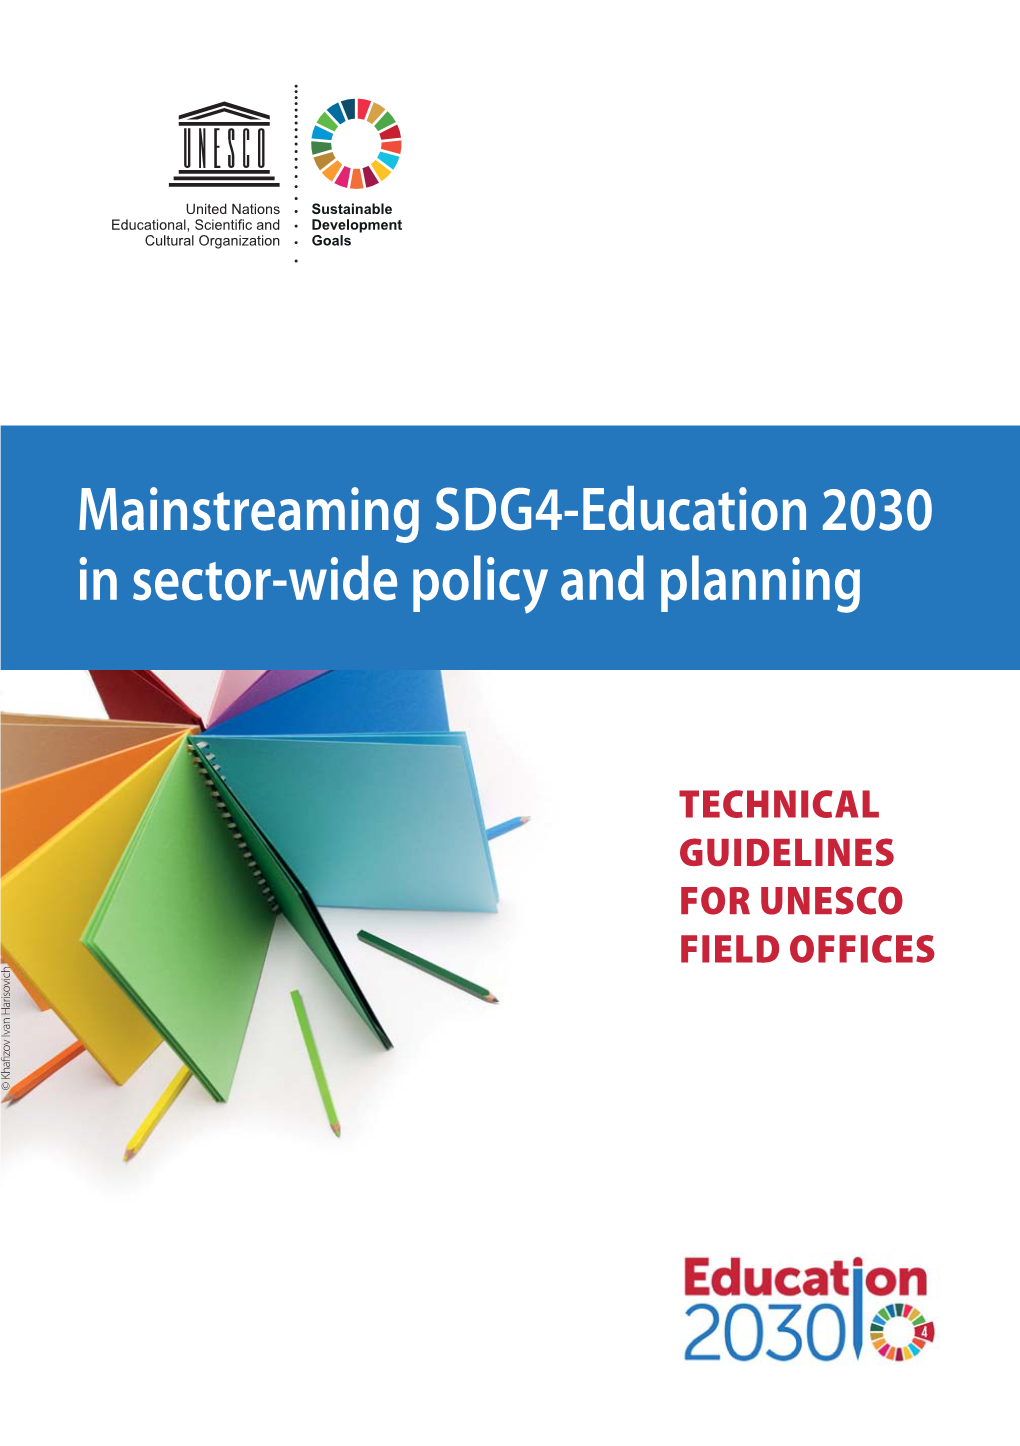 Mainstreaming SDG4-Education 2030 in Sector-Wide Policy and Planning